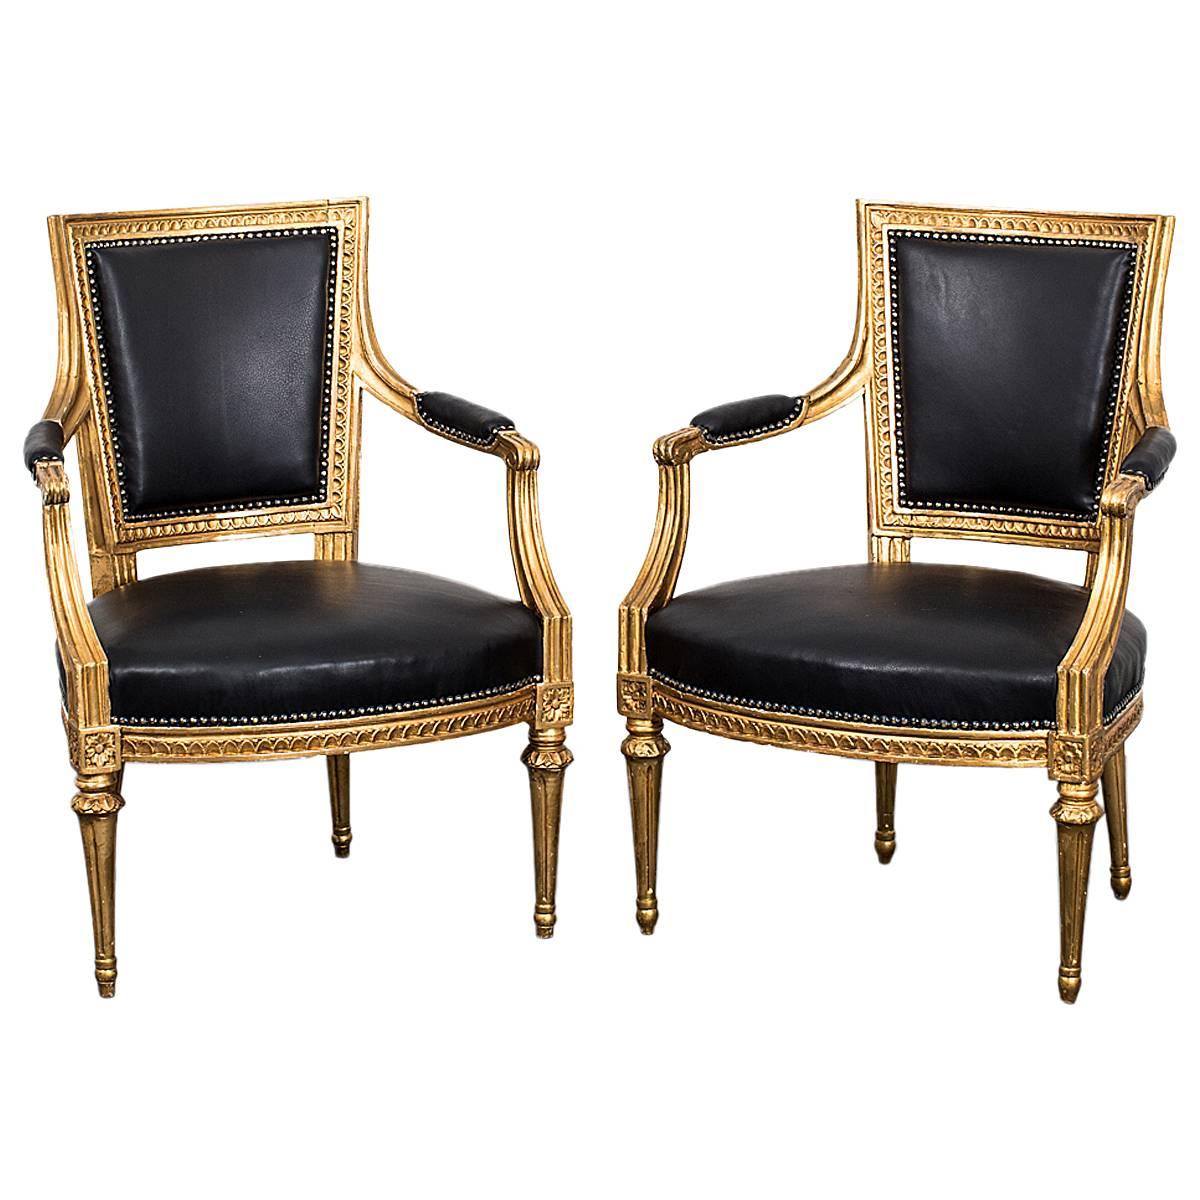 Armchairs Pair Swedish Gilt Wood Black Leather Gustavian Sweden. A pair of exquisite example of armchairs made in Sweden during the Gustavian period 1775-1810. Frame in original gilded wood with leather upholstered armrests, seat and back.